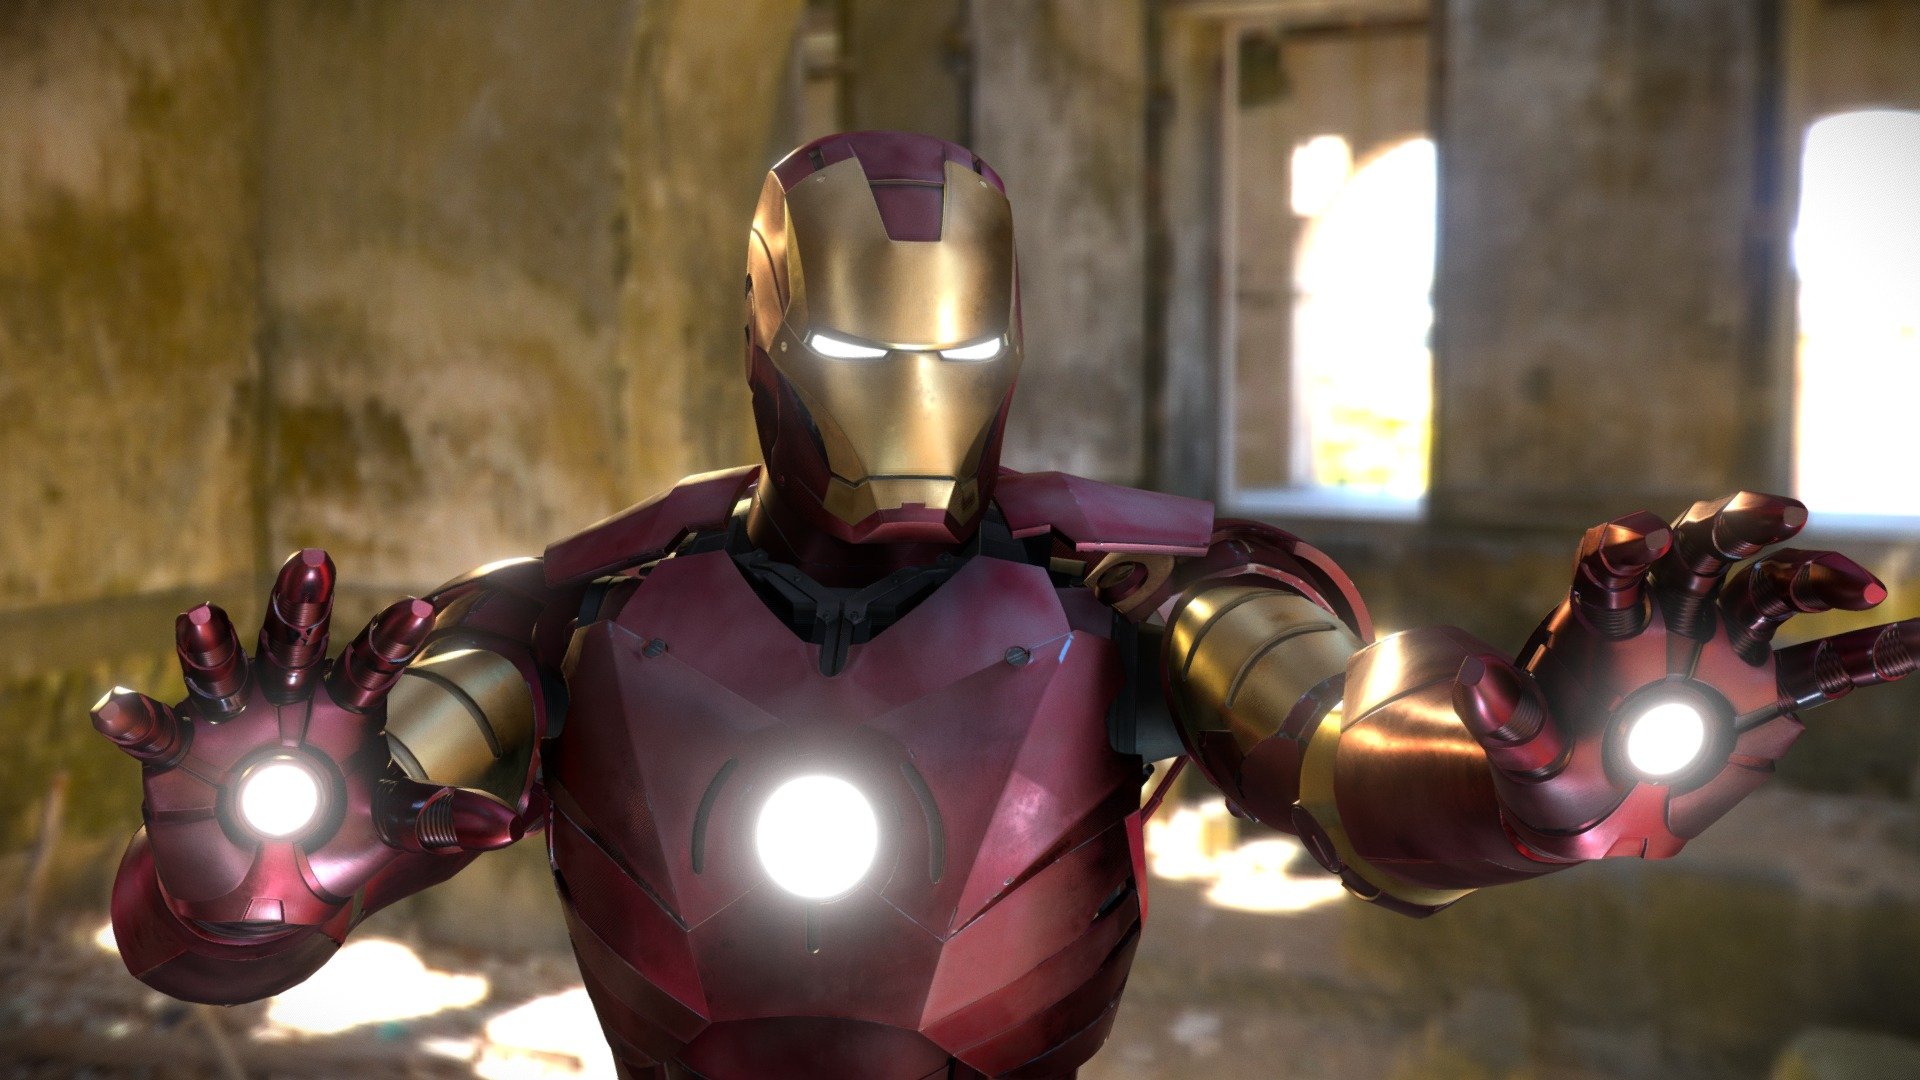 Ironman Mark 3 - 3D model by unBlakeable [f5e6848] - Sketchfab